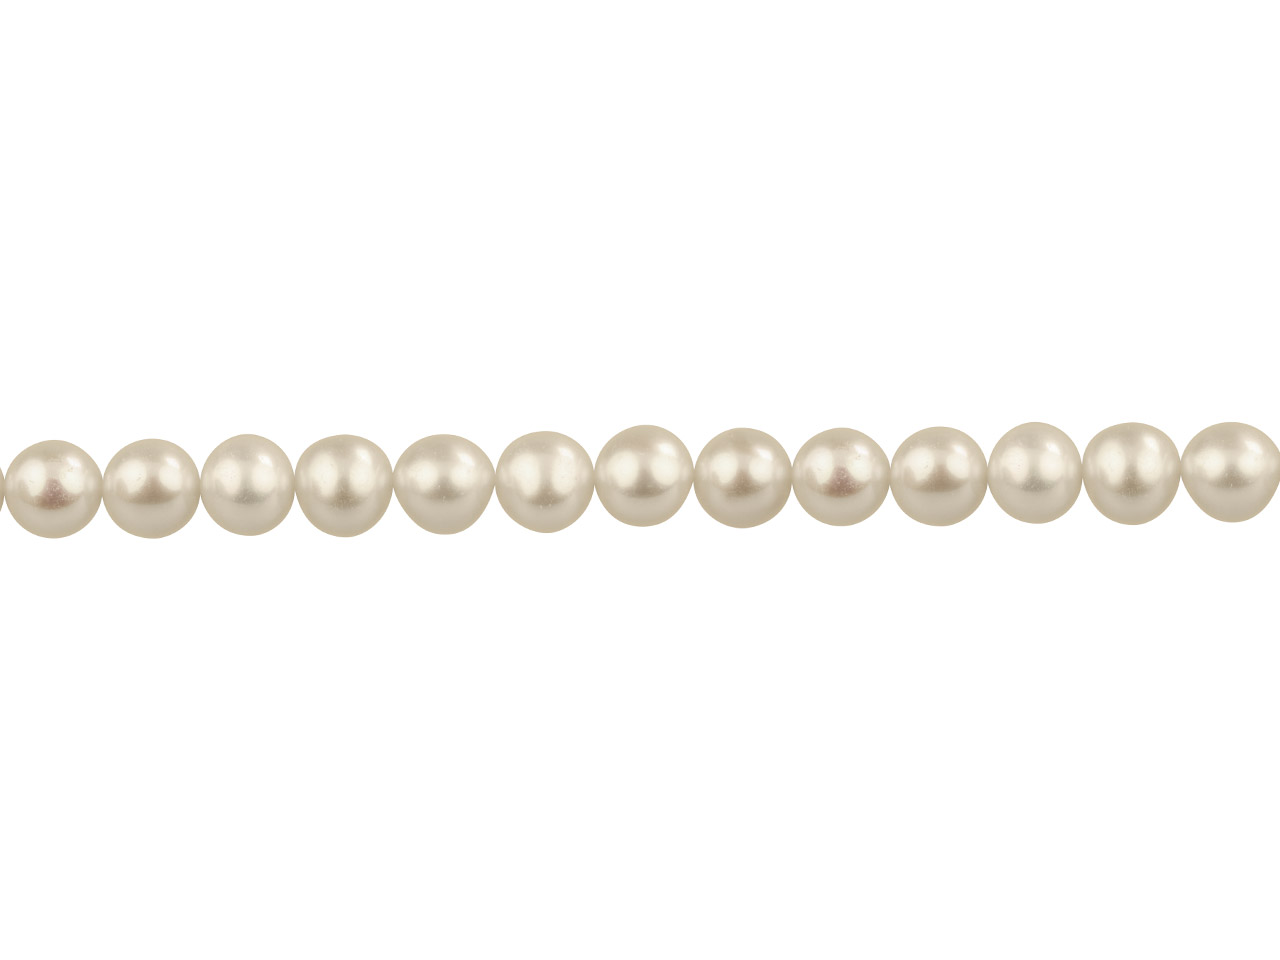 How many pearls in one strand?